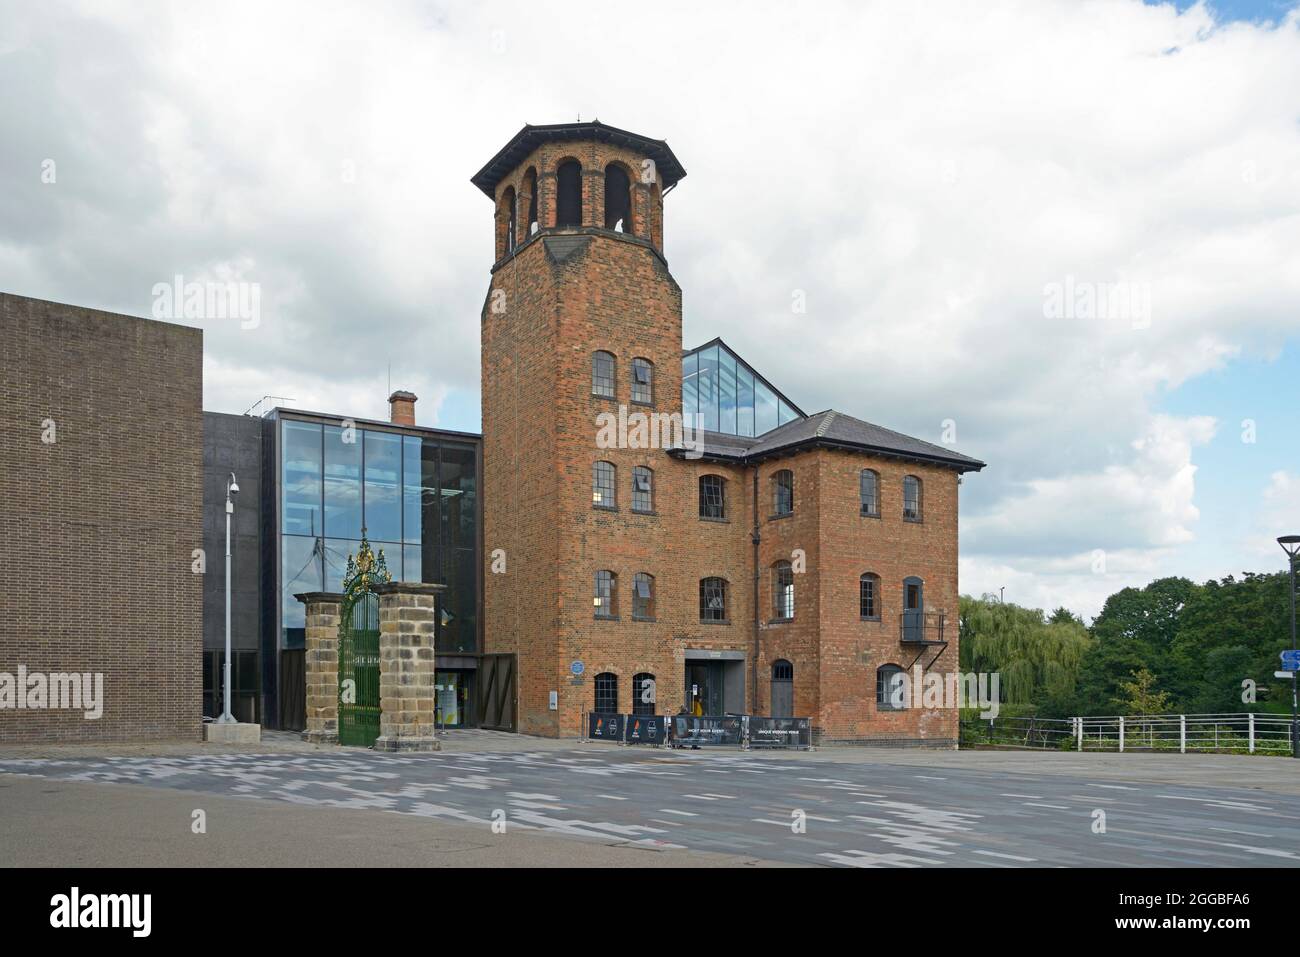 Museum of making, in Derby. Stock Photo